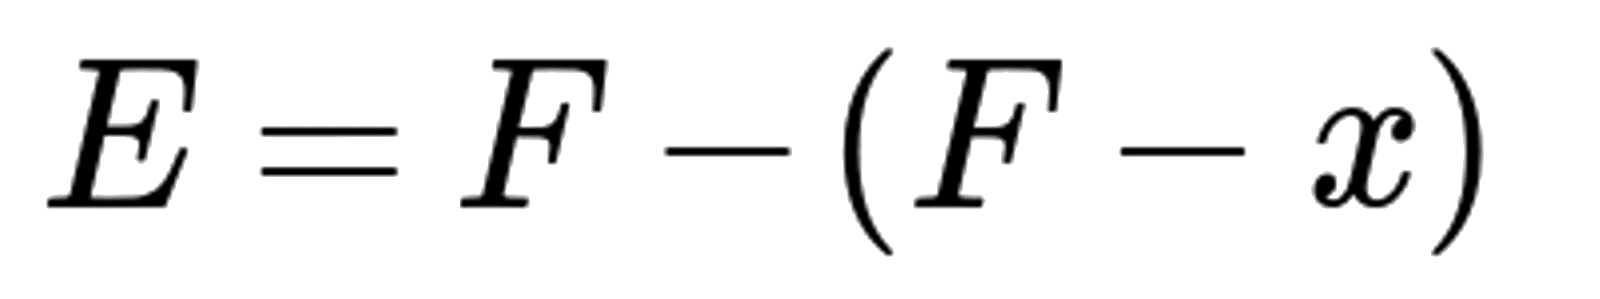 Math Formula for Fire Resonant Frequency